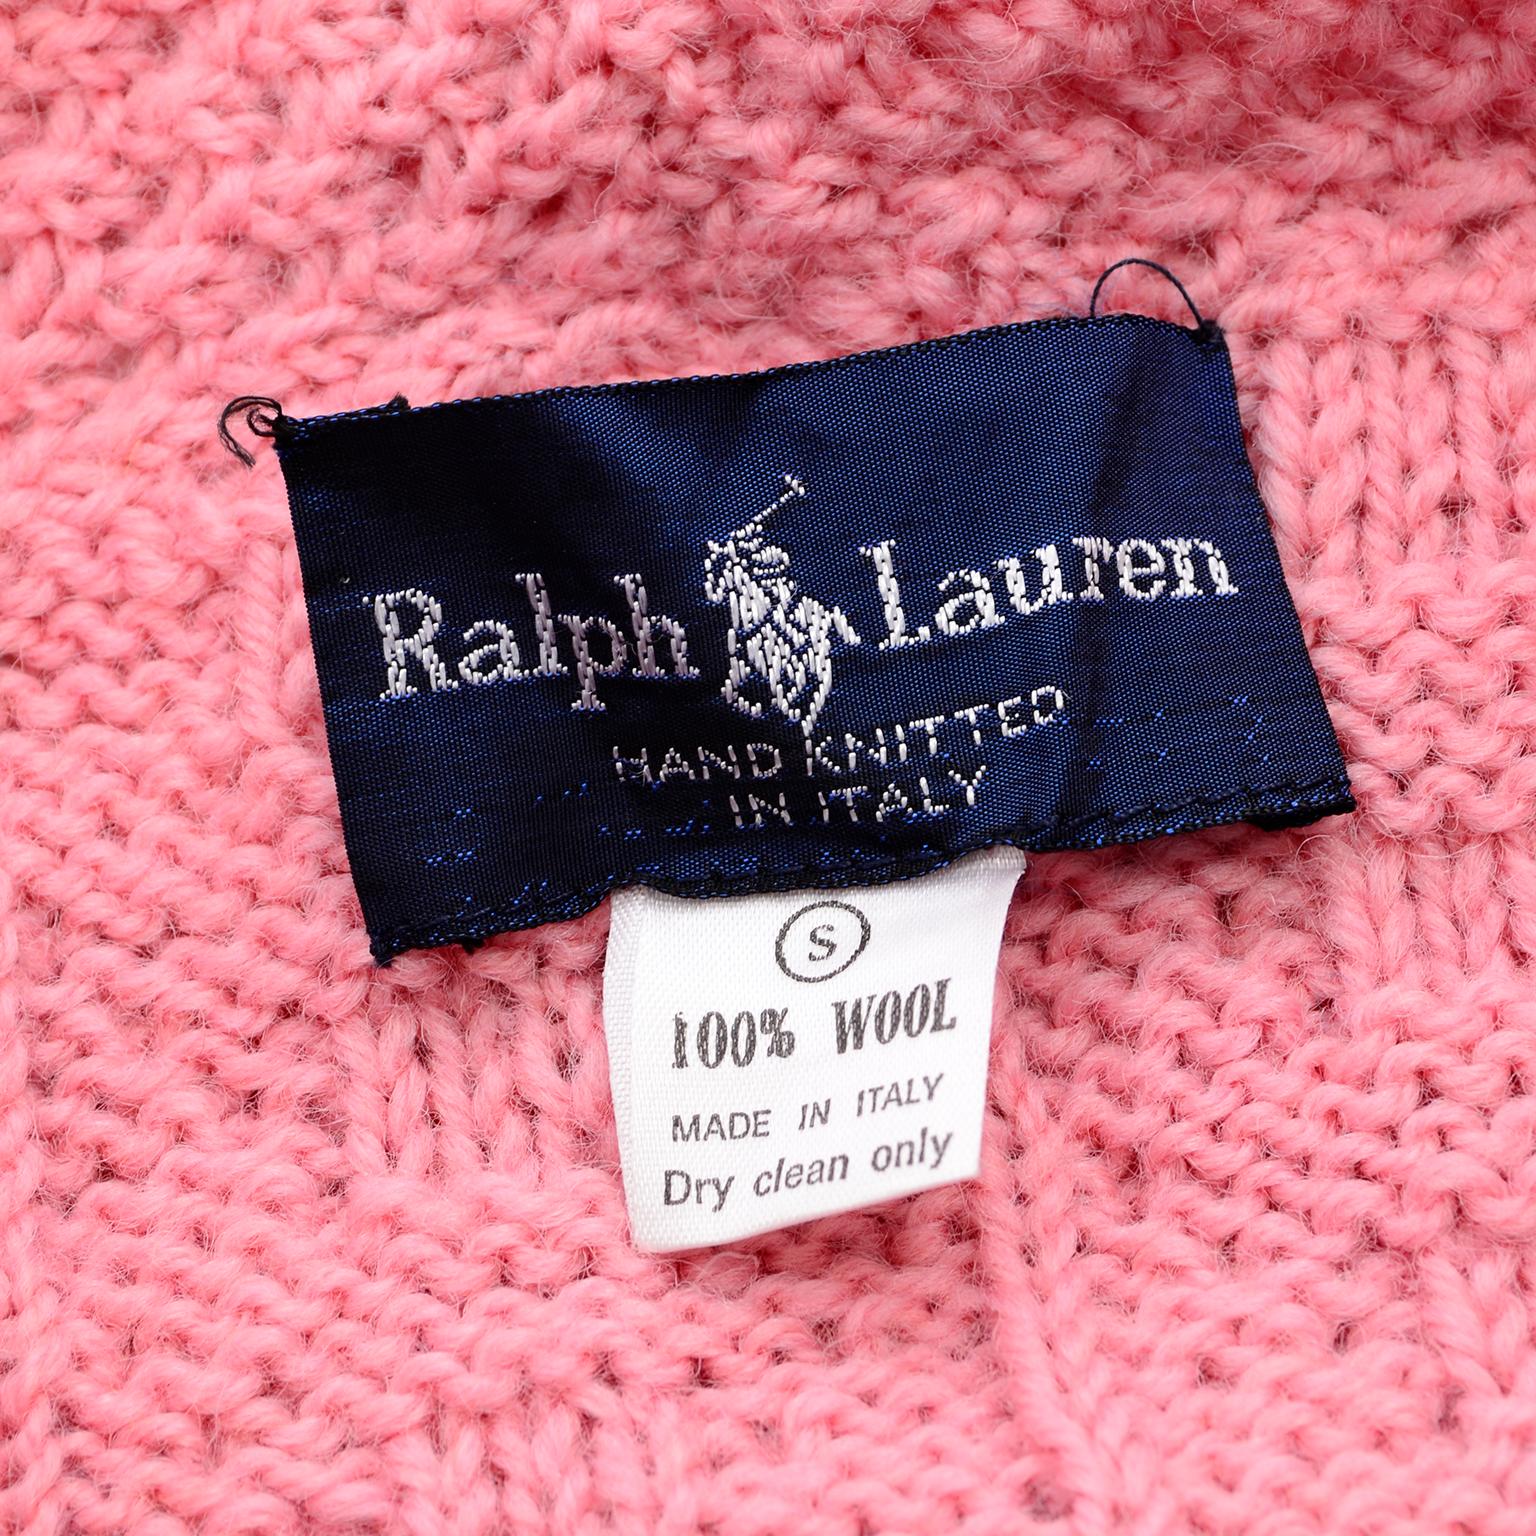 Ralph Lauren Vintage Pink Wool Cardigan Knit Sweater Made in Italy 3